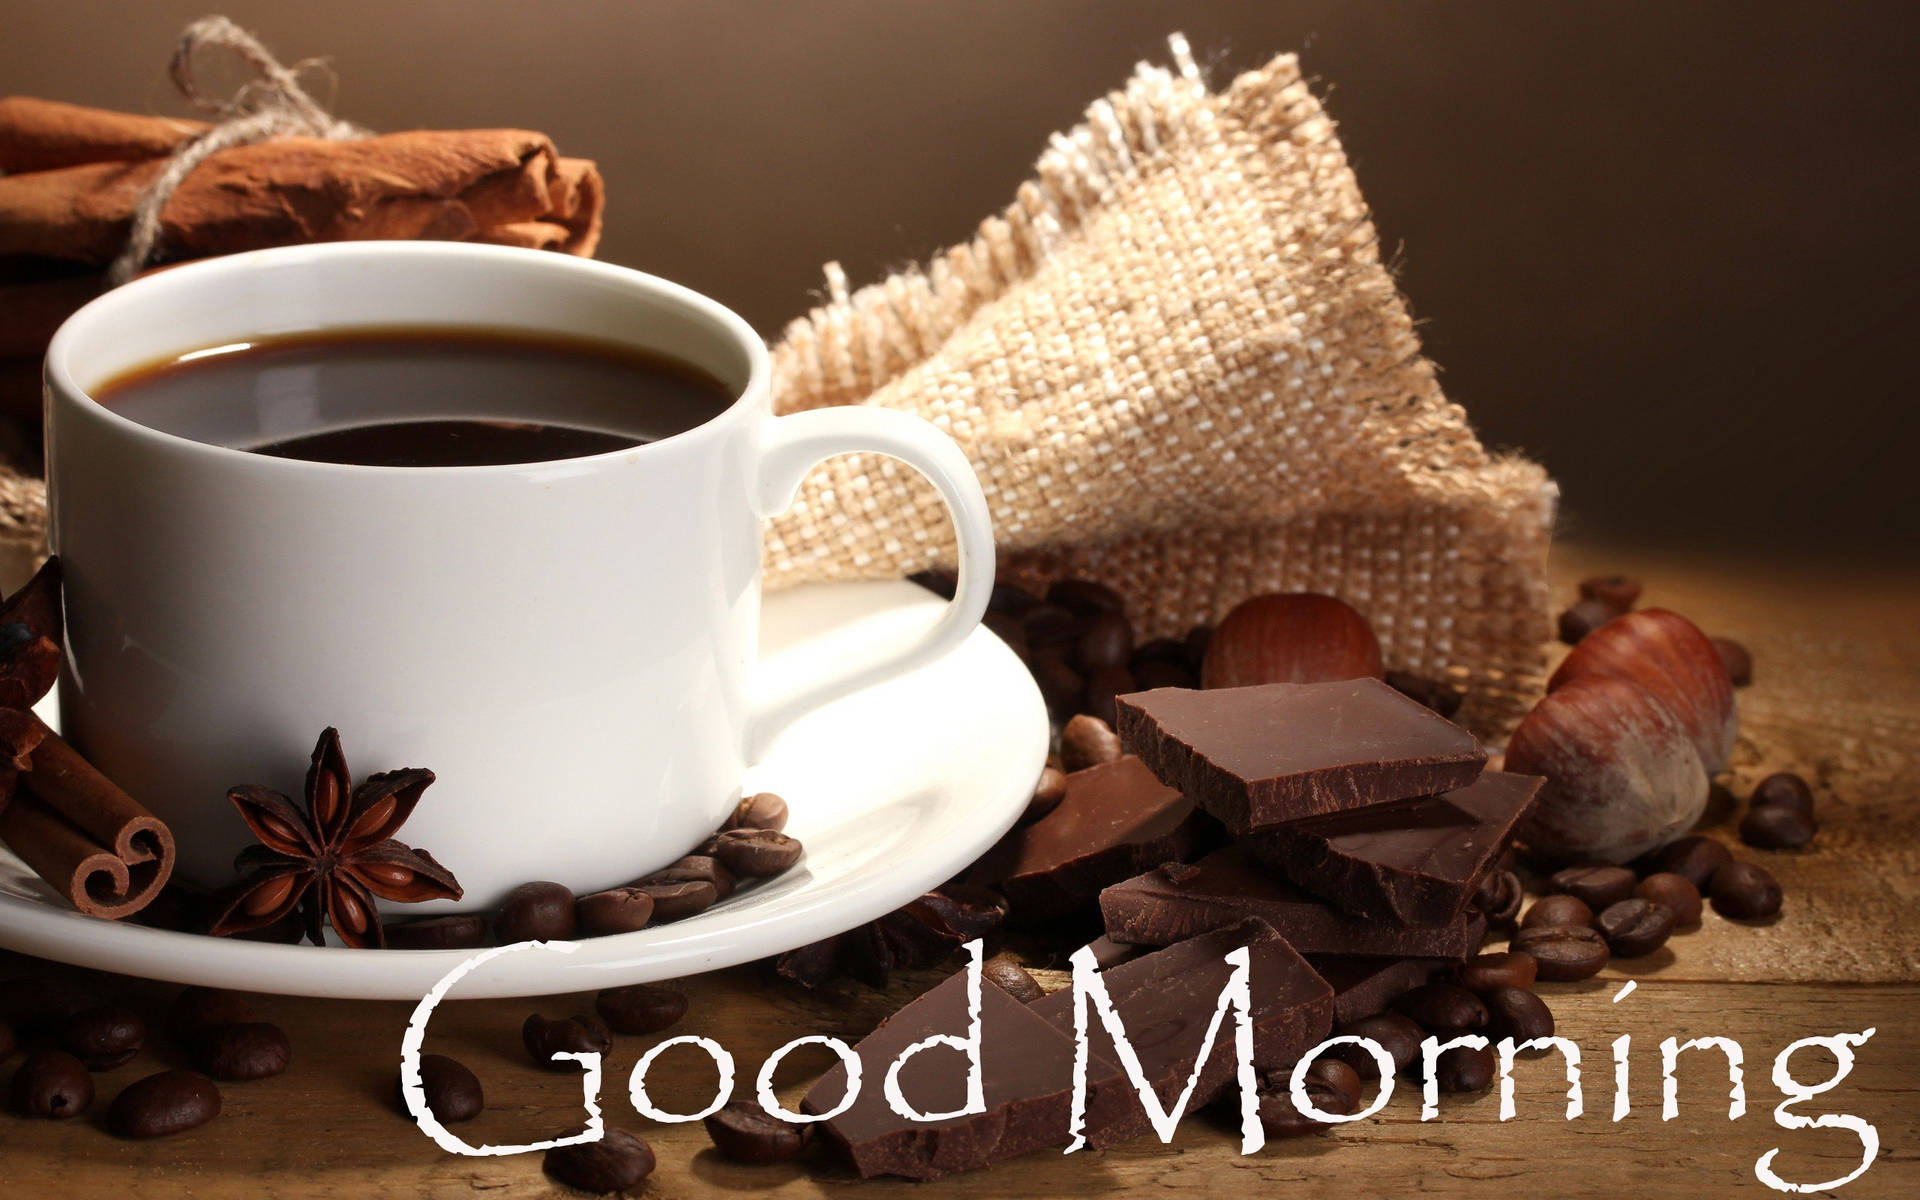 Good Morning Coffee And Chocolates Wallpaper